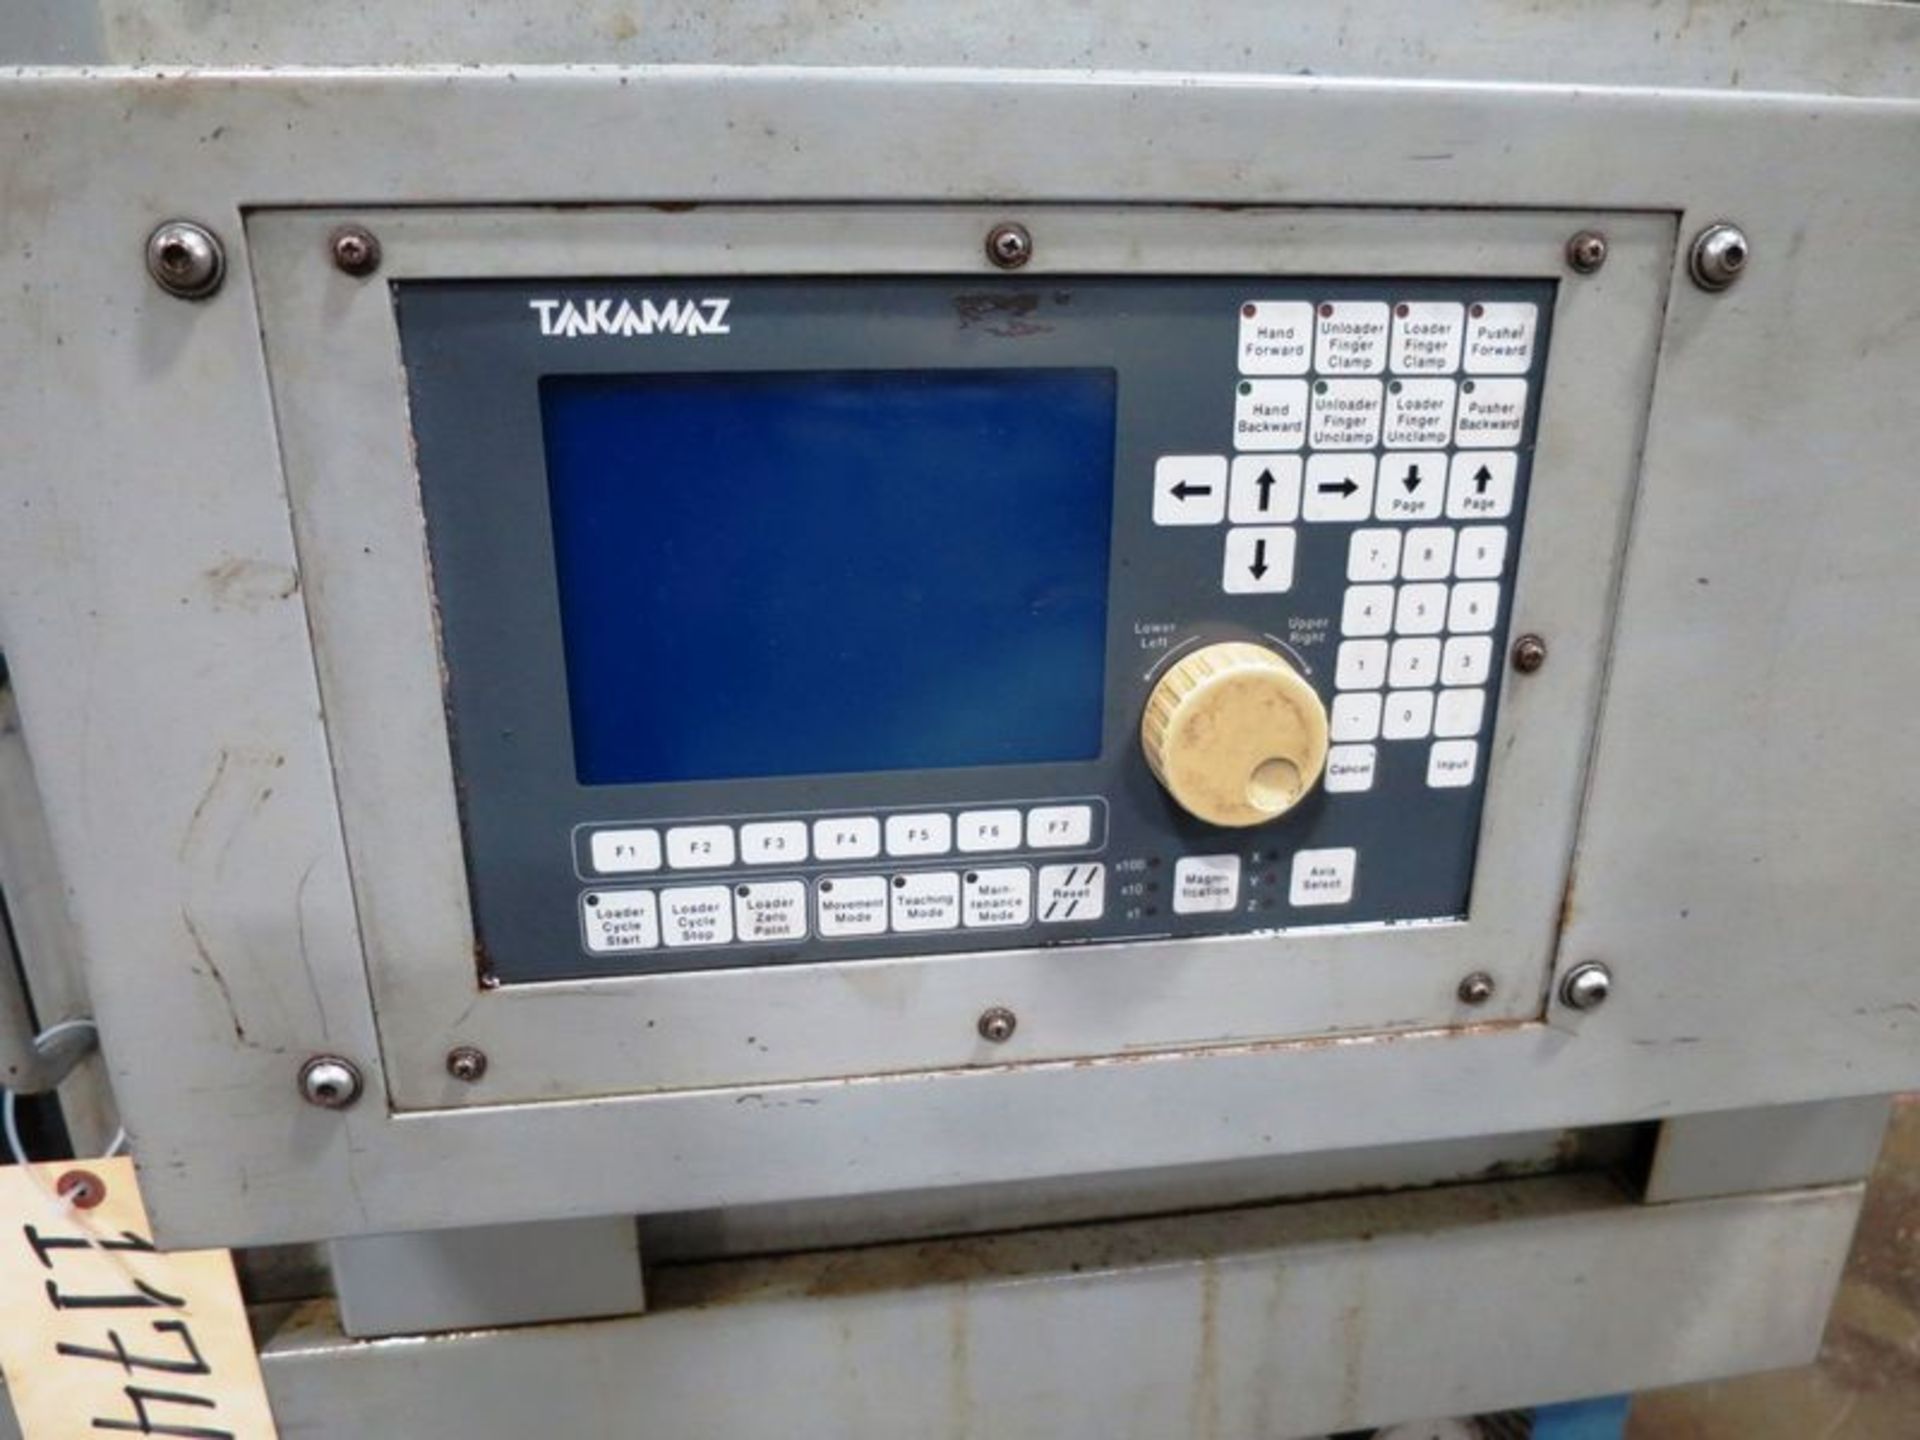 Takamaz XD-101 CNC Twin Spindle Turning Center with Gantry Loading System, S/N 300444, New 2006 - Image 9 of 13